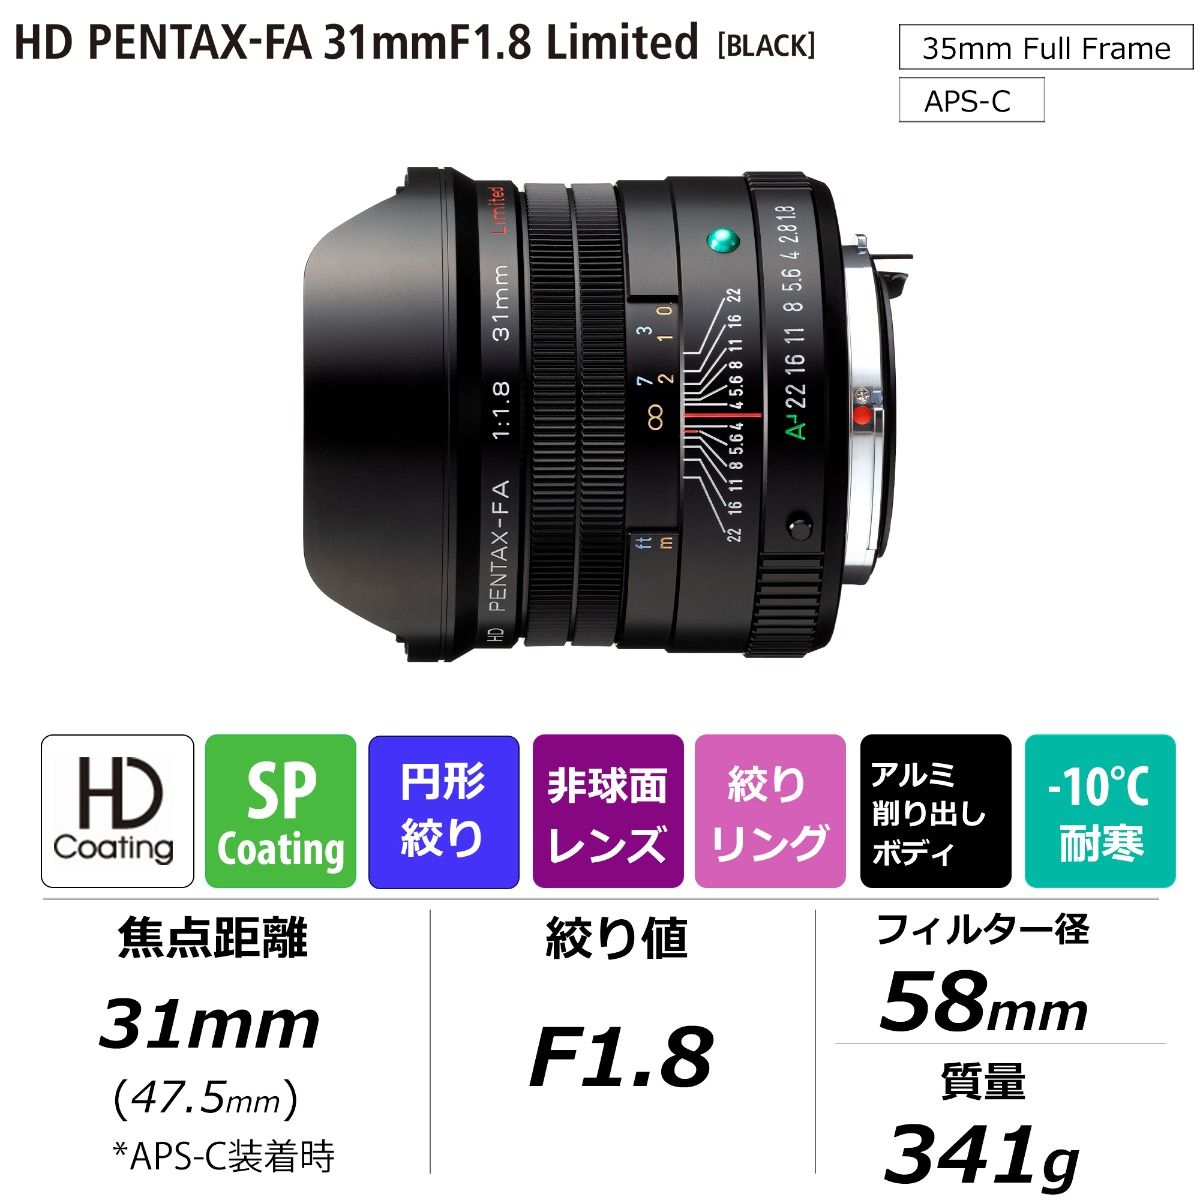 Coming soon: three HD PENTAX-FA Limited lenses and a new Pentax K